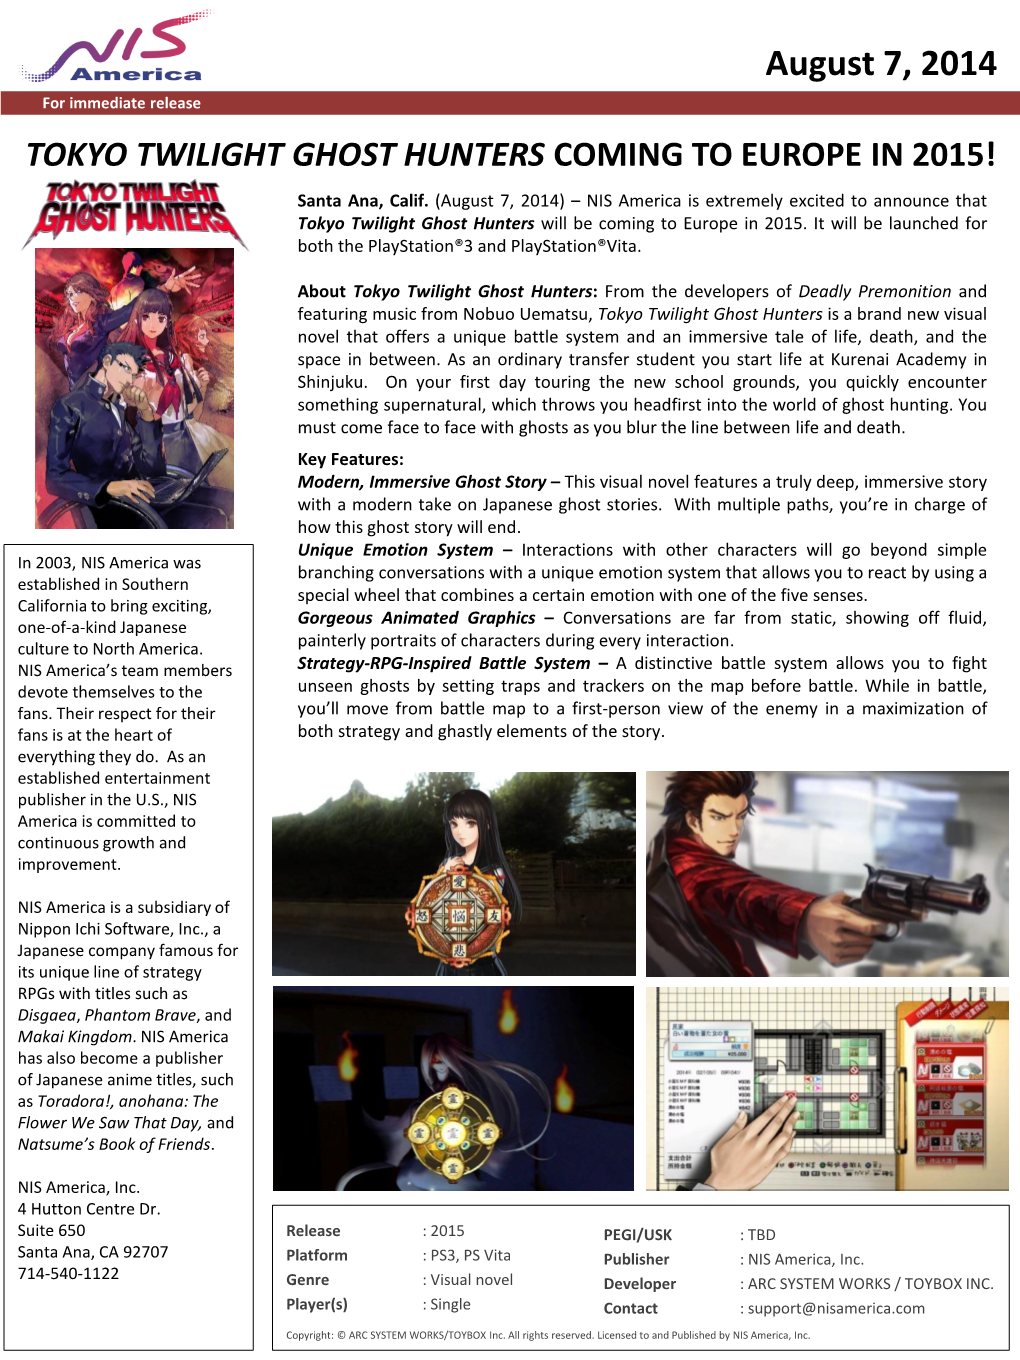 August 7, 2014 for Immediate Release TOKYO TWILIGHT GHOST HUNTERS COMING to EUROPE in 2015! Santa Ana, Calif